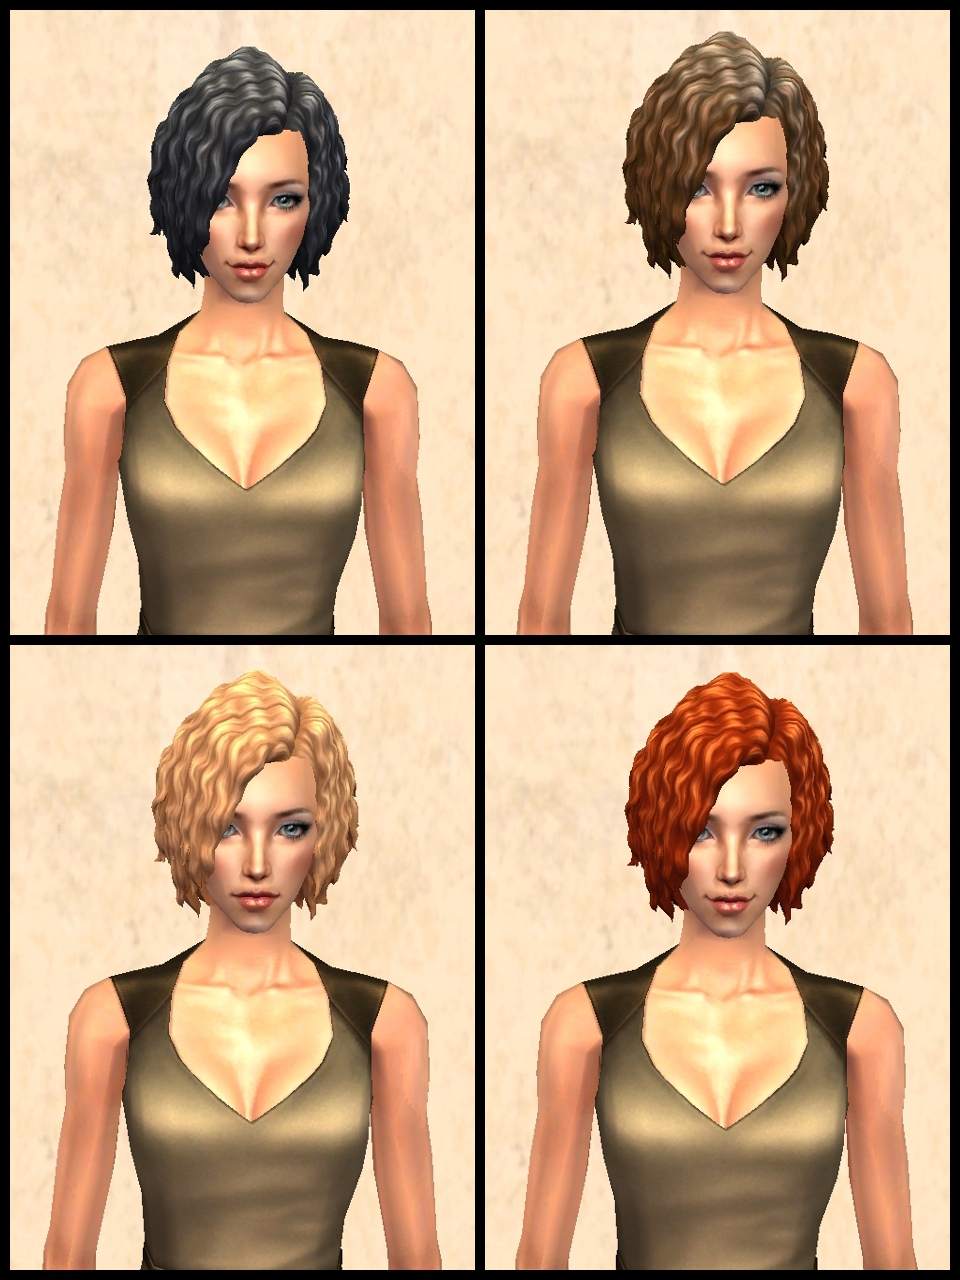 Theninthwavesims The Sims 2 The Sims 4 Parenthood Twists Hair For